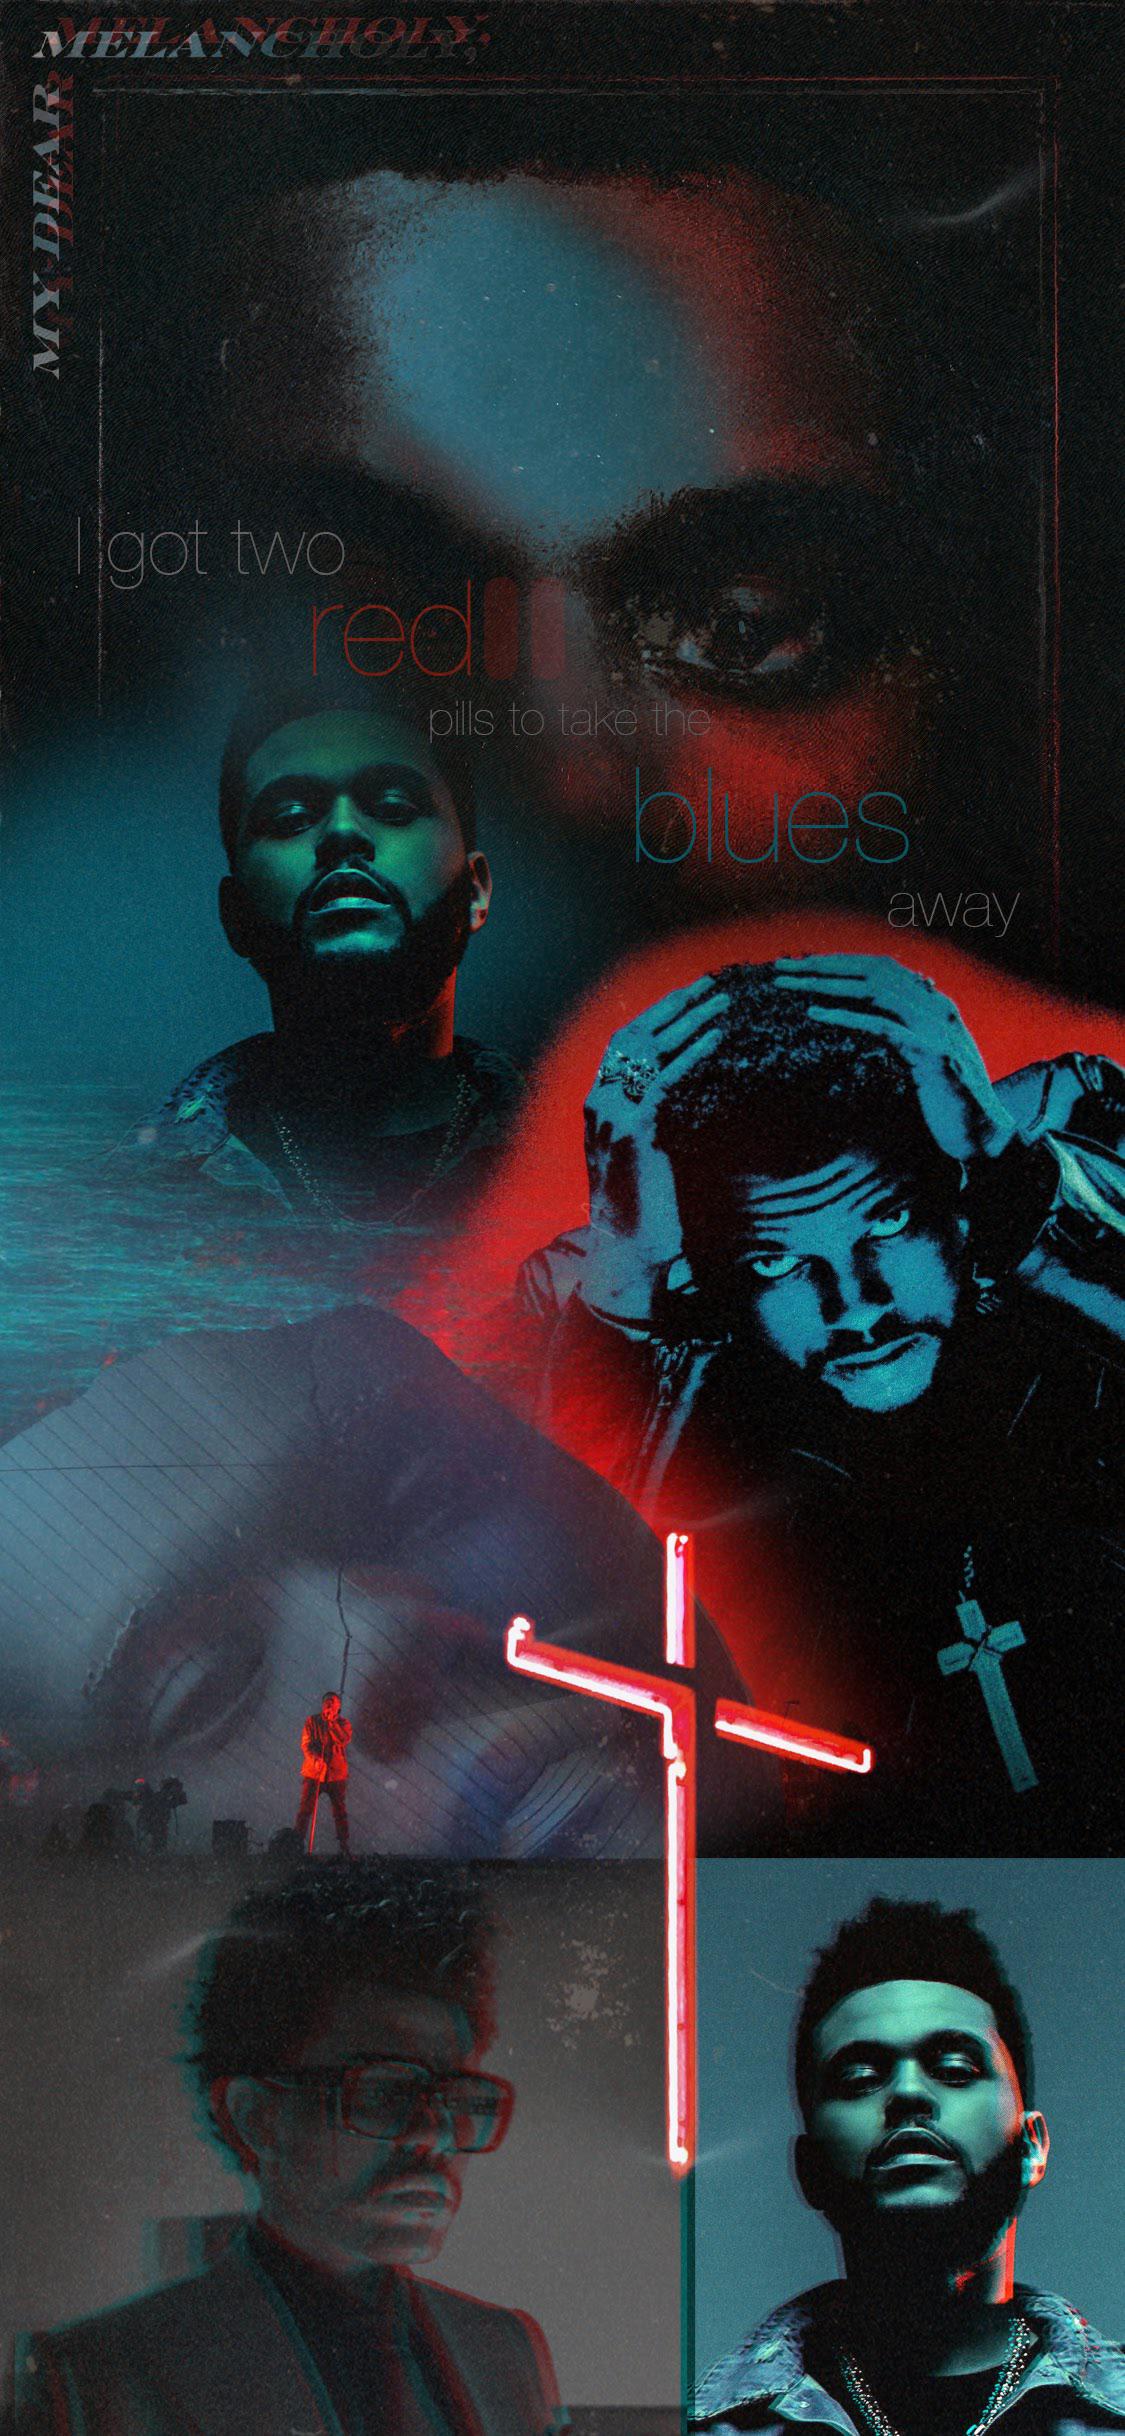 The Weeknd wallpaper I made a few years ago, thought I'd share it here for fellow fans :)